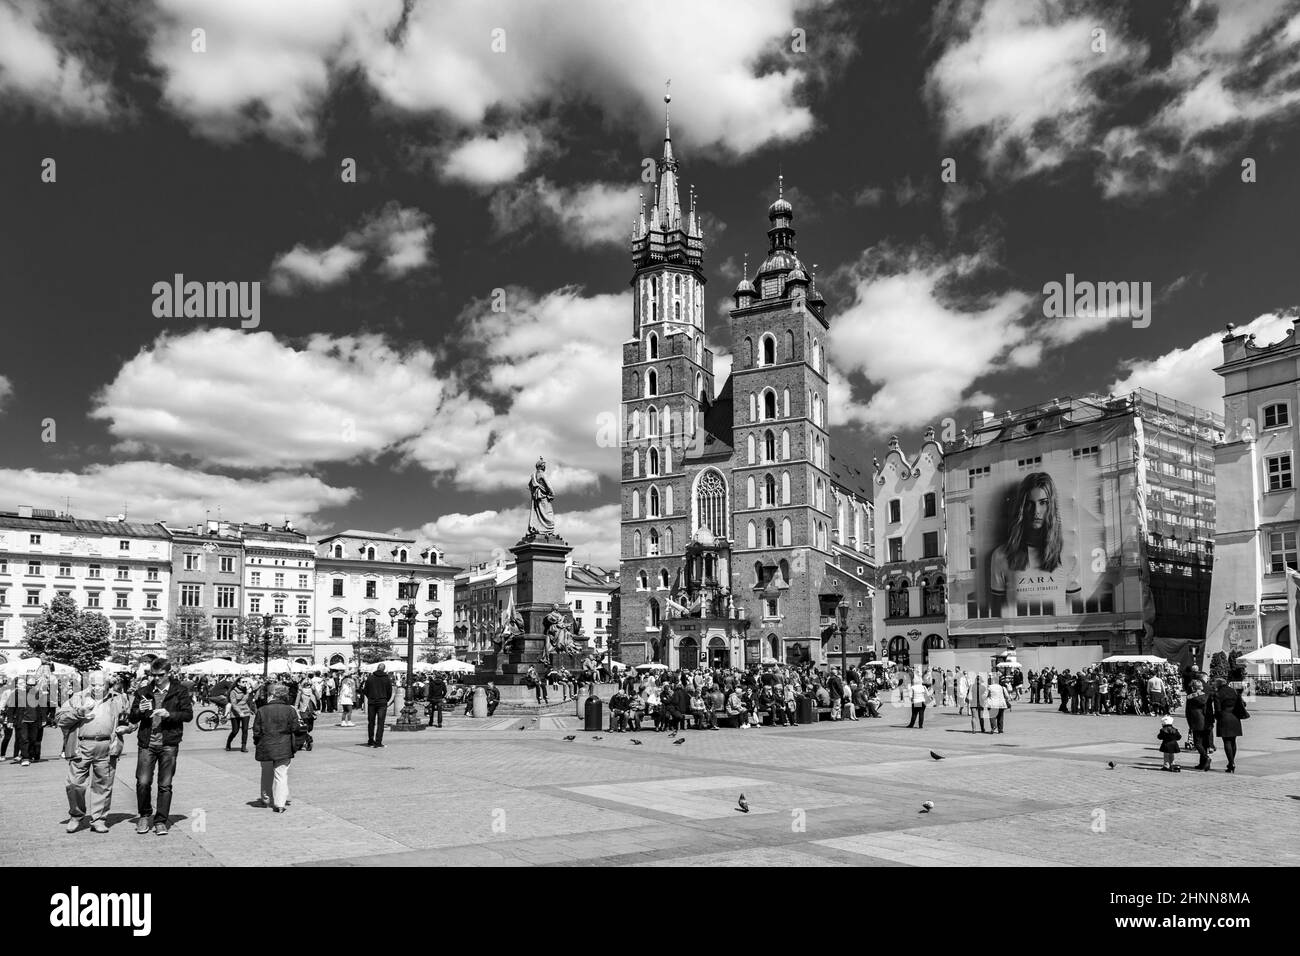 Tourists at the Market Square in Krakow . Main Market Square, one of the largest medieval squares in Europe, was built in 1257 Stock Photo